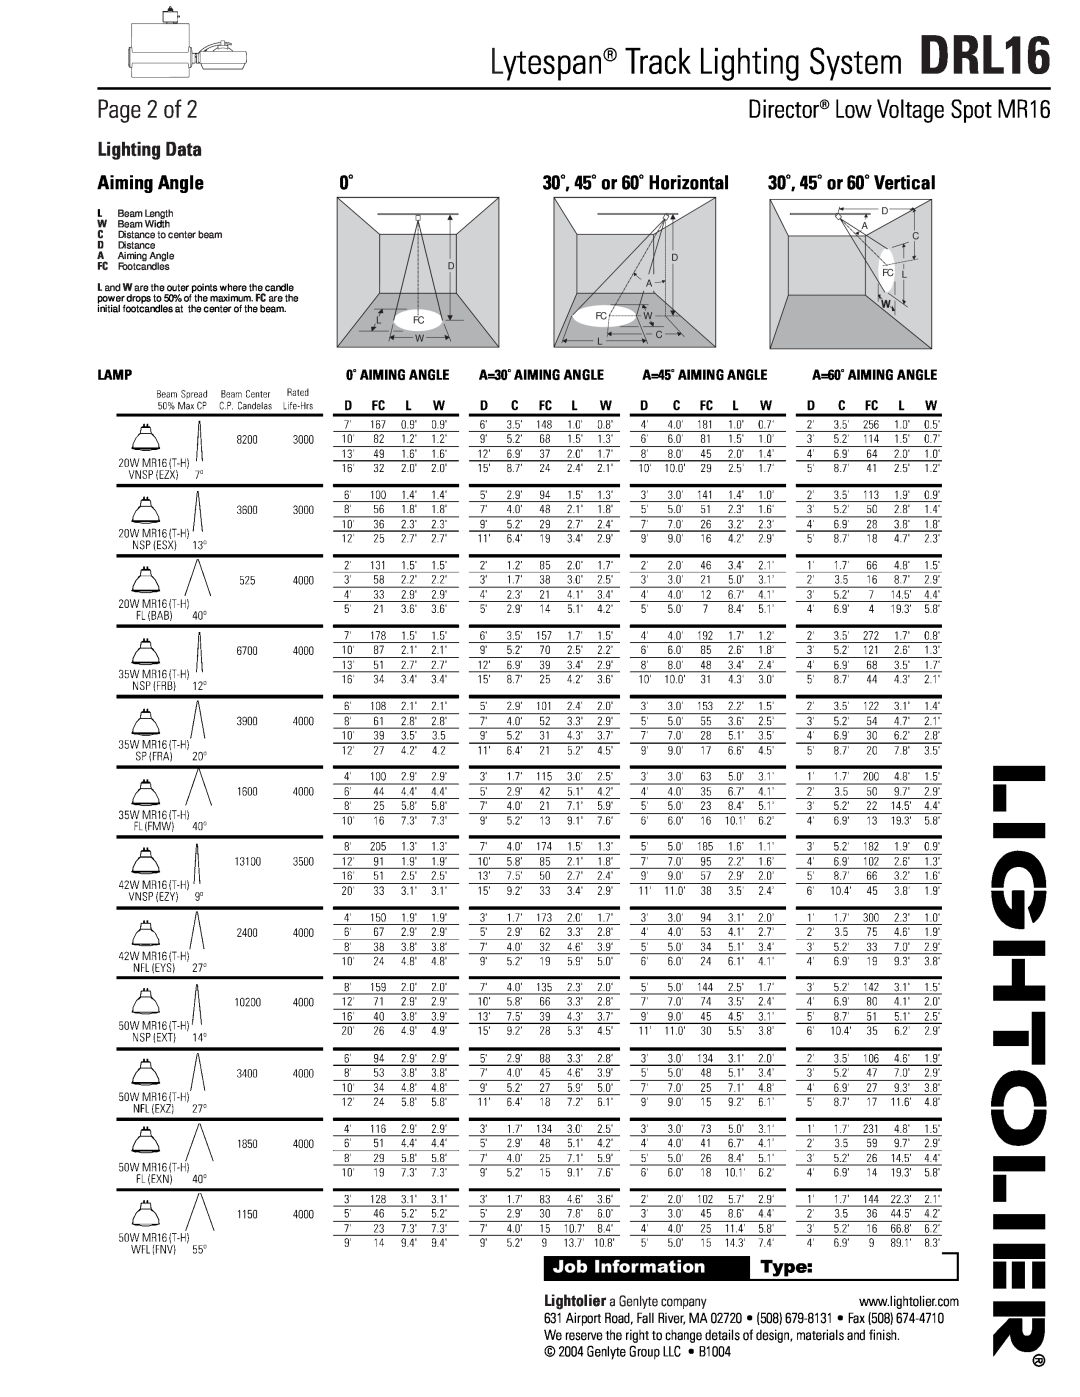 Lightolier DRL16 Page 2 of, Director Low Voltage Spot MR16, Lighting Data, Aiming Angle, 30˚, 45˚ or 60˚ Horizontal, Type 